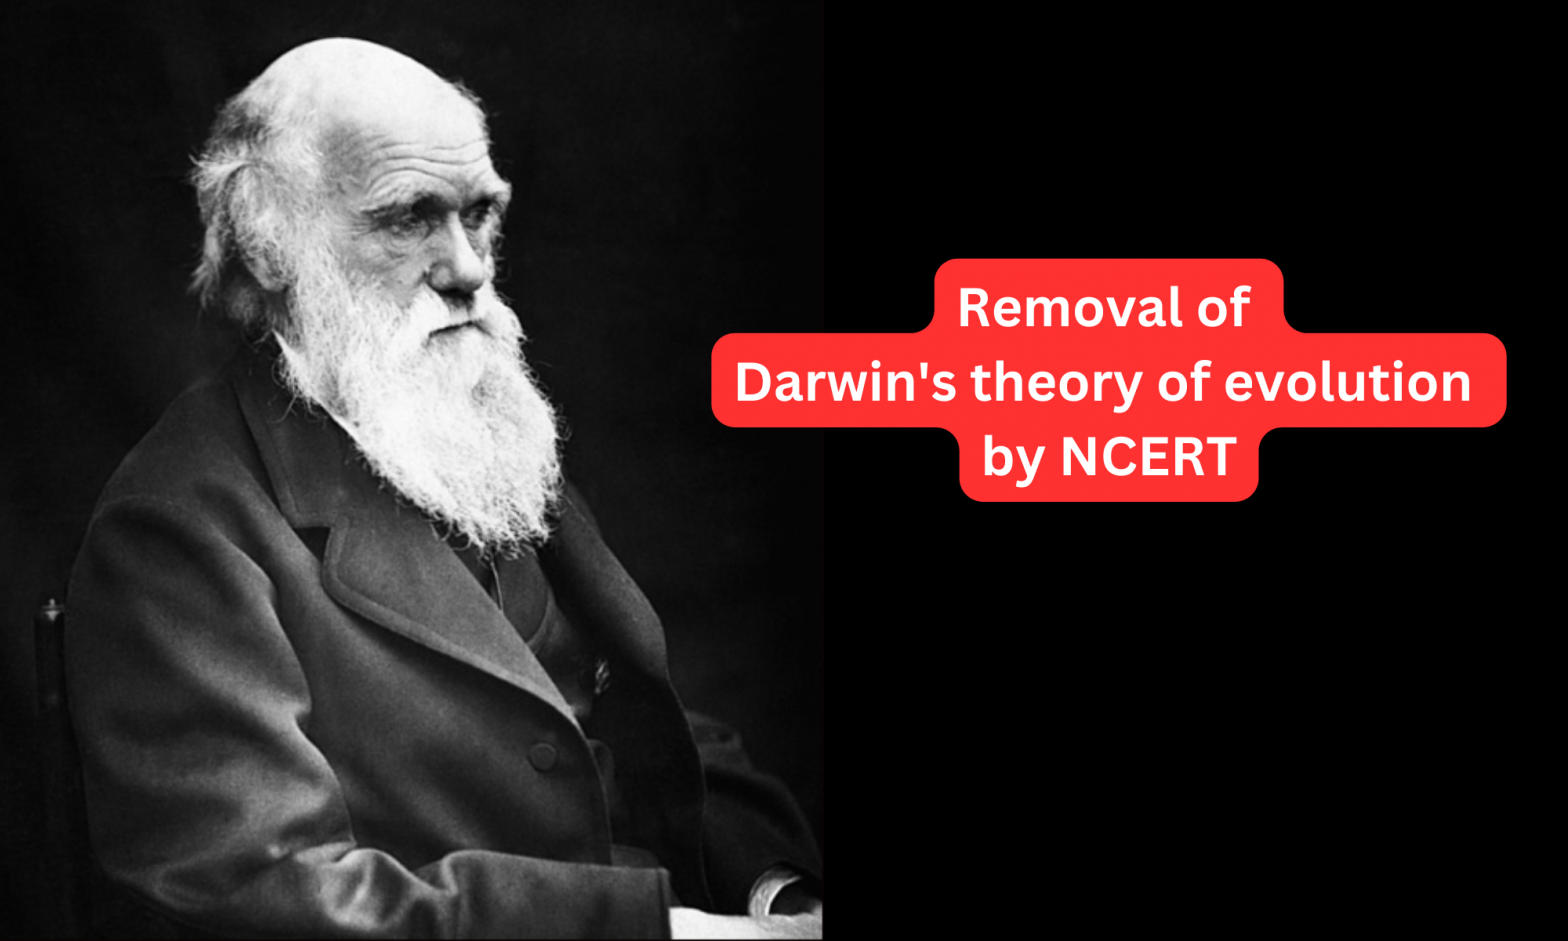 Removal of Darwin's theory of evolution by NCERT